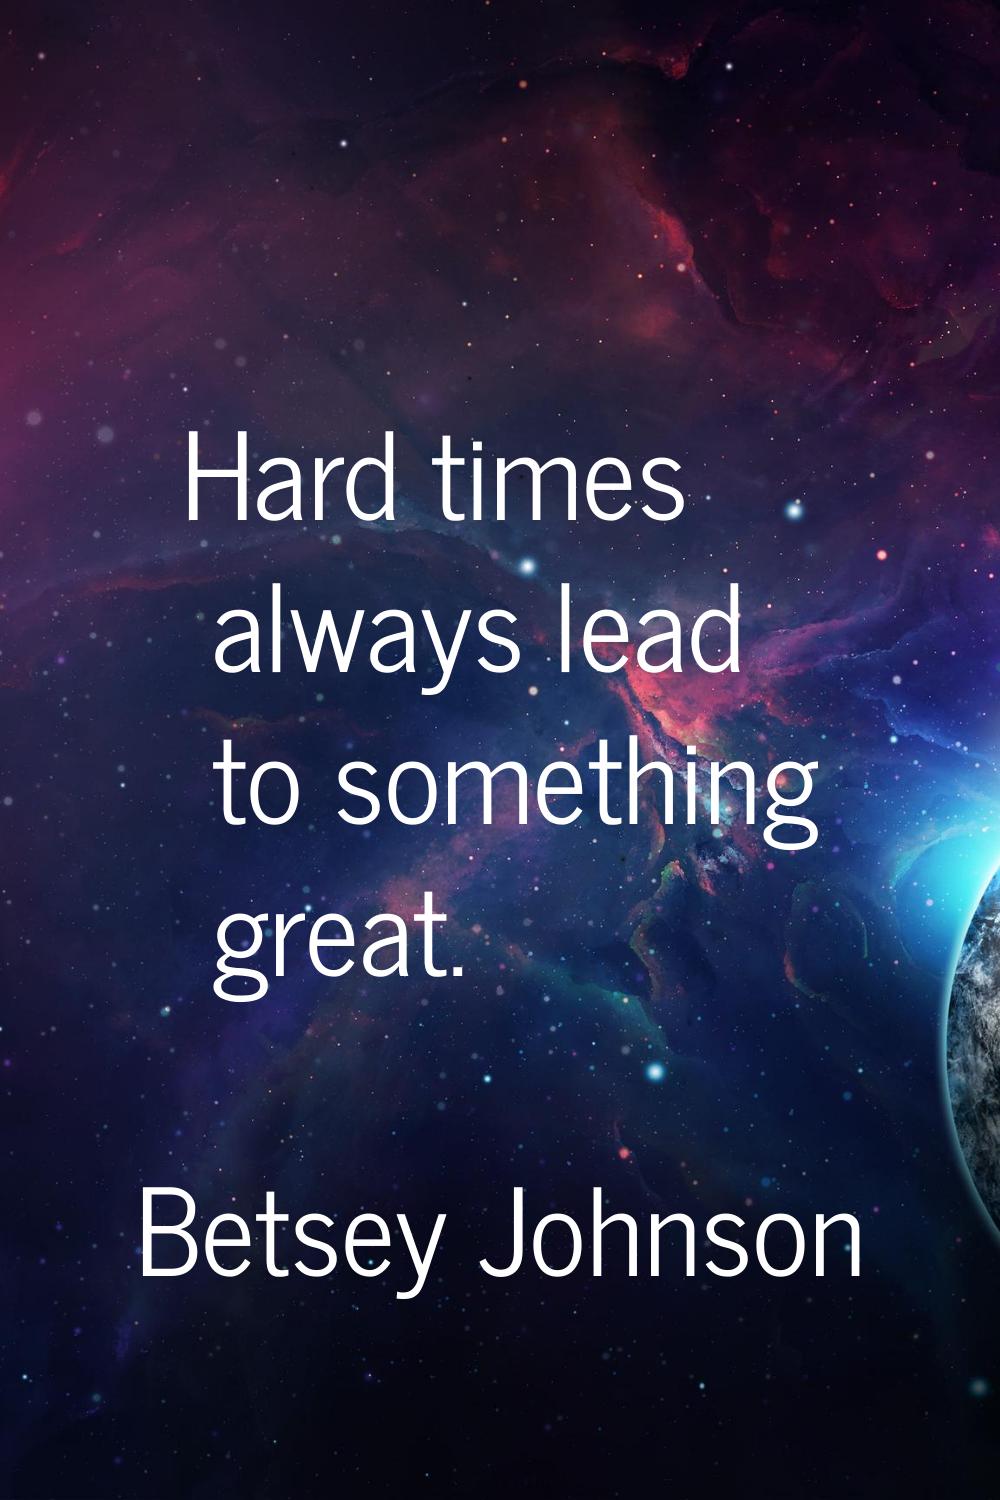 Hard times always lead to something great.